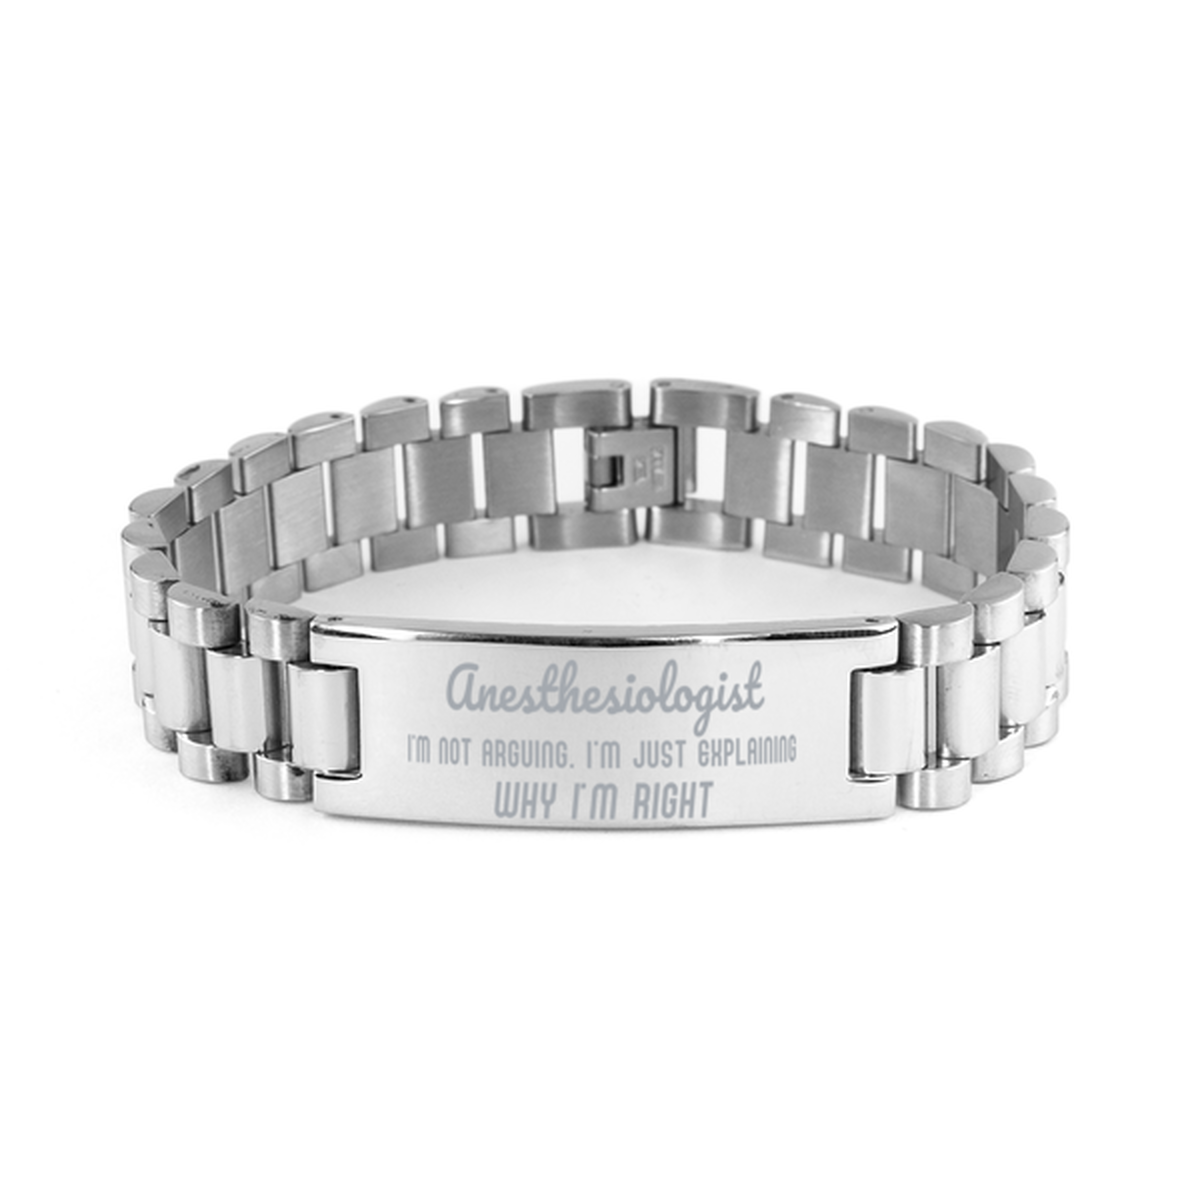 Anesthesiologist I'm not Arguing. I'm Just Explaining Why I'm RIGHT Ladder Stainless Steel Bracelet, Graduation Birthday Christmas Anesthesiologist Gifts For Anesthesiologist Funny Saying Quote Present for Men Women Coworker